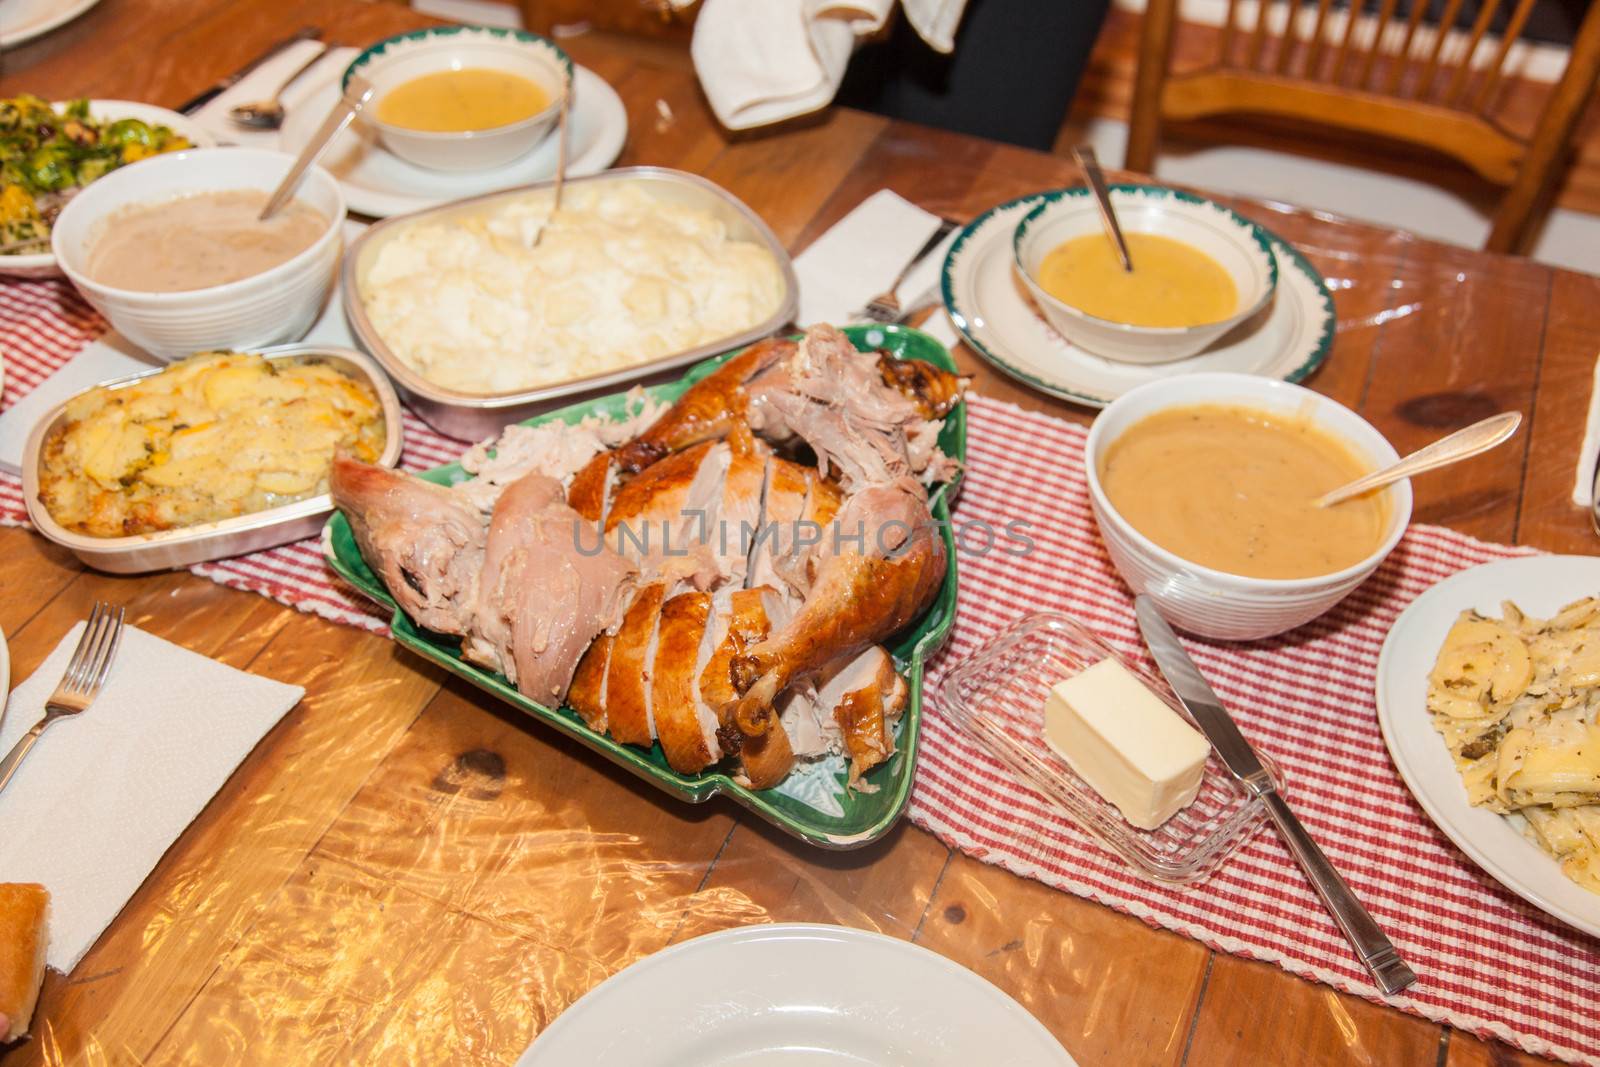 The majority of the dishes in the traditional American version of Thanksgiving dinner are made from foods native to the New World, as according to tradition the Pilgrims received these foods from the Native Americans.